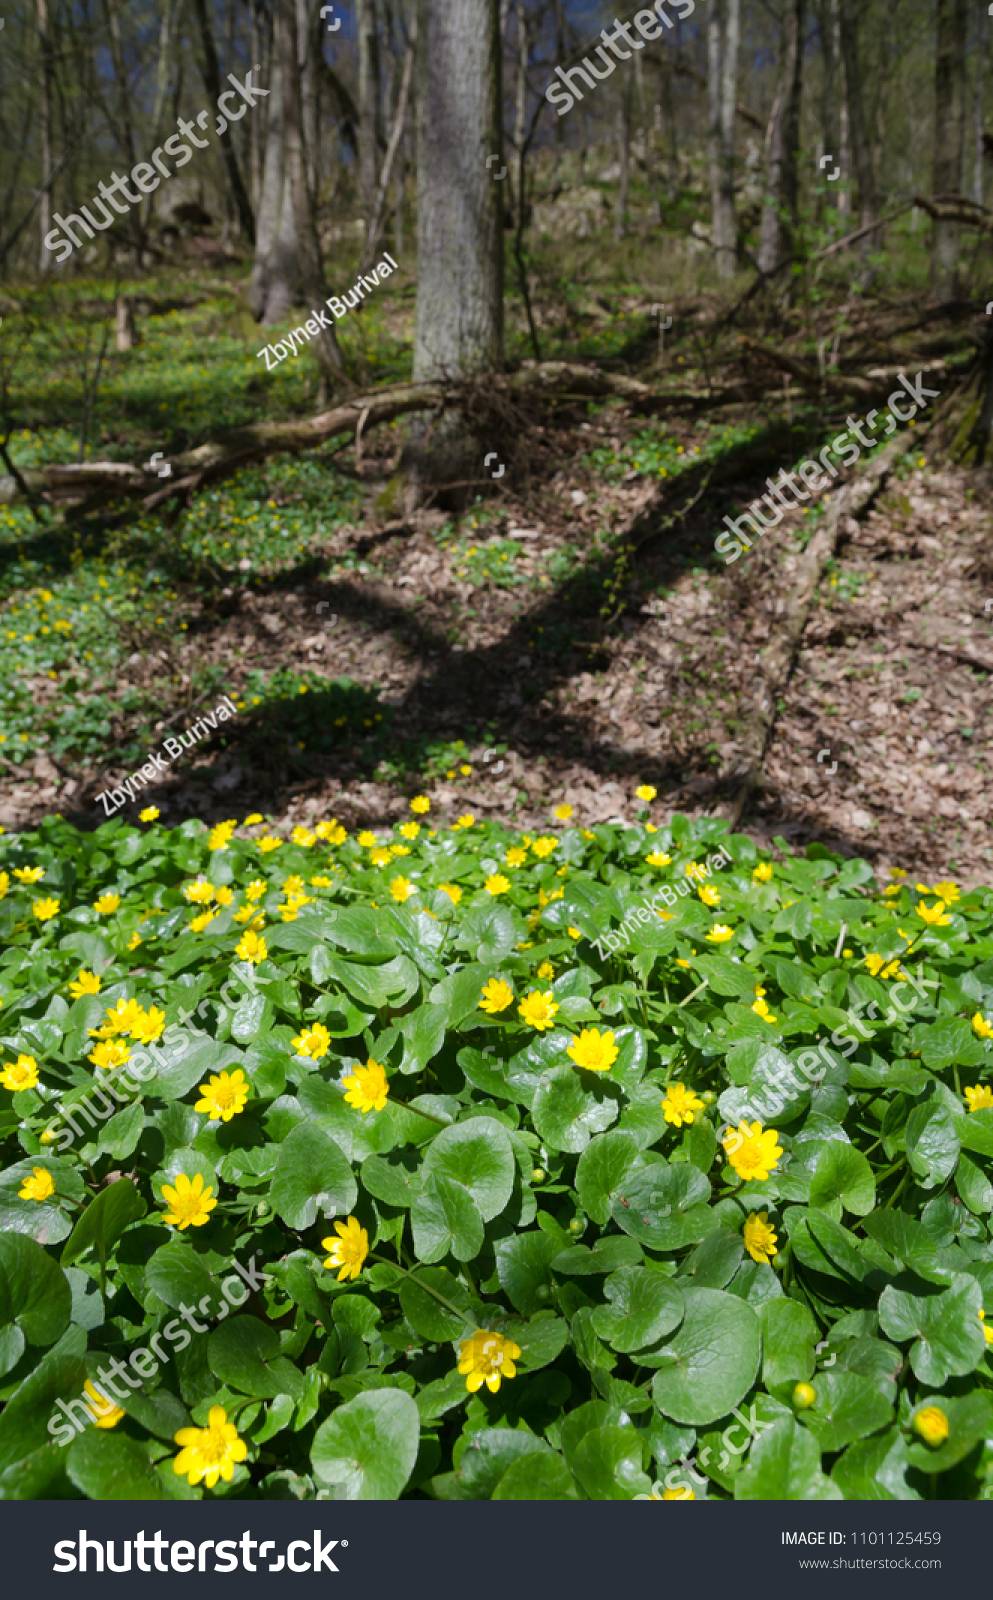 Group of flowering Pileworts (Ficaria verna) in the spring forest in Oslava valley, Czech Republic #1101125459